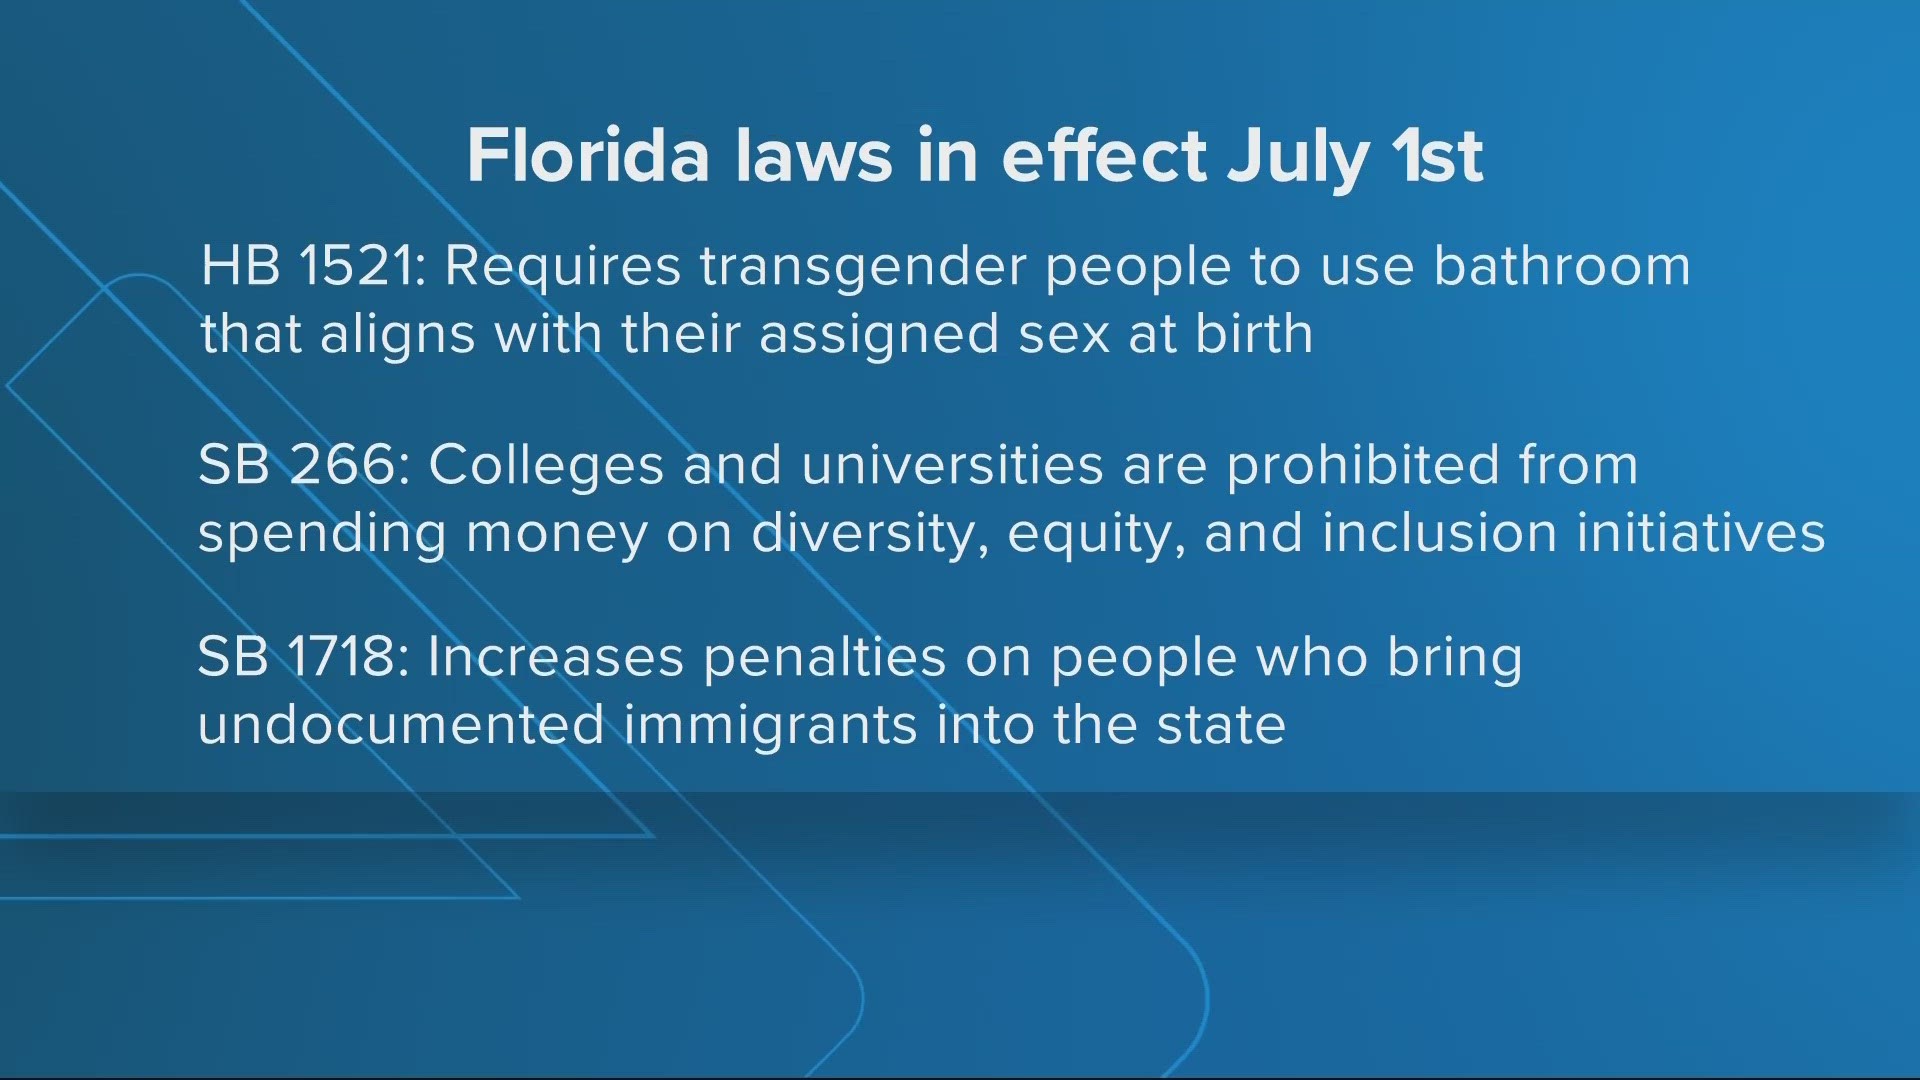 Over 200 new Florida laws took effect July 1